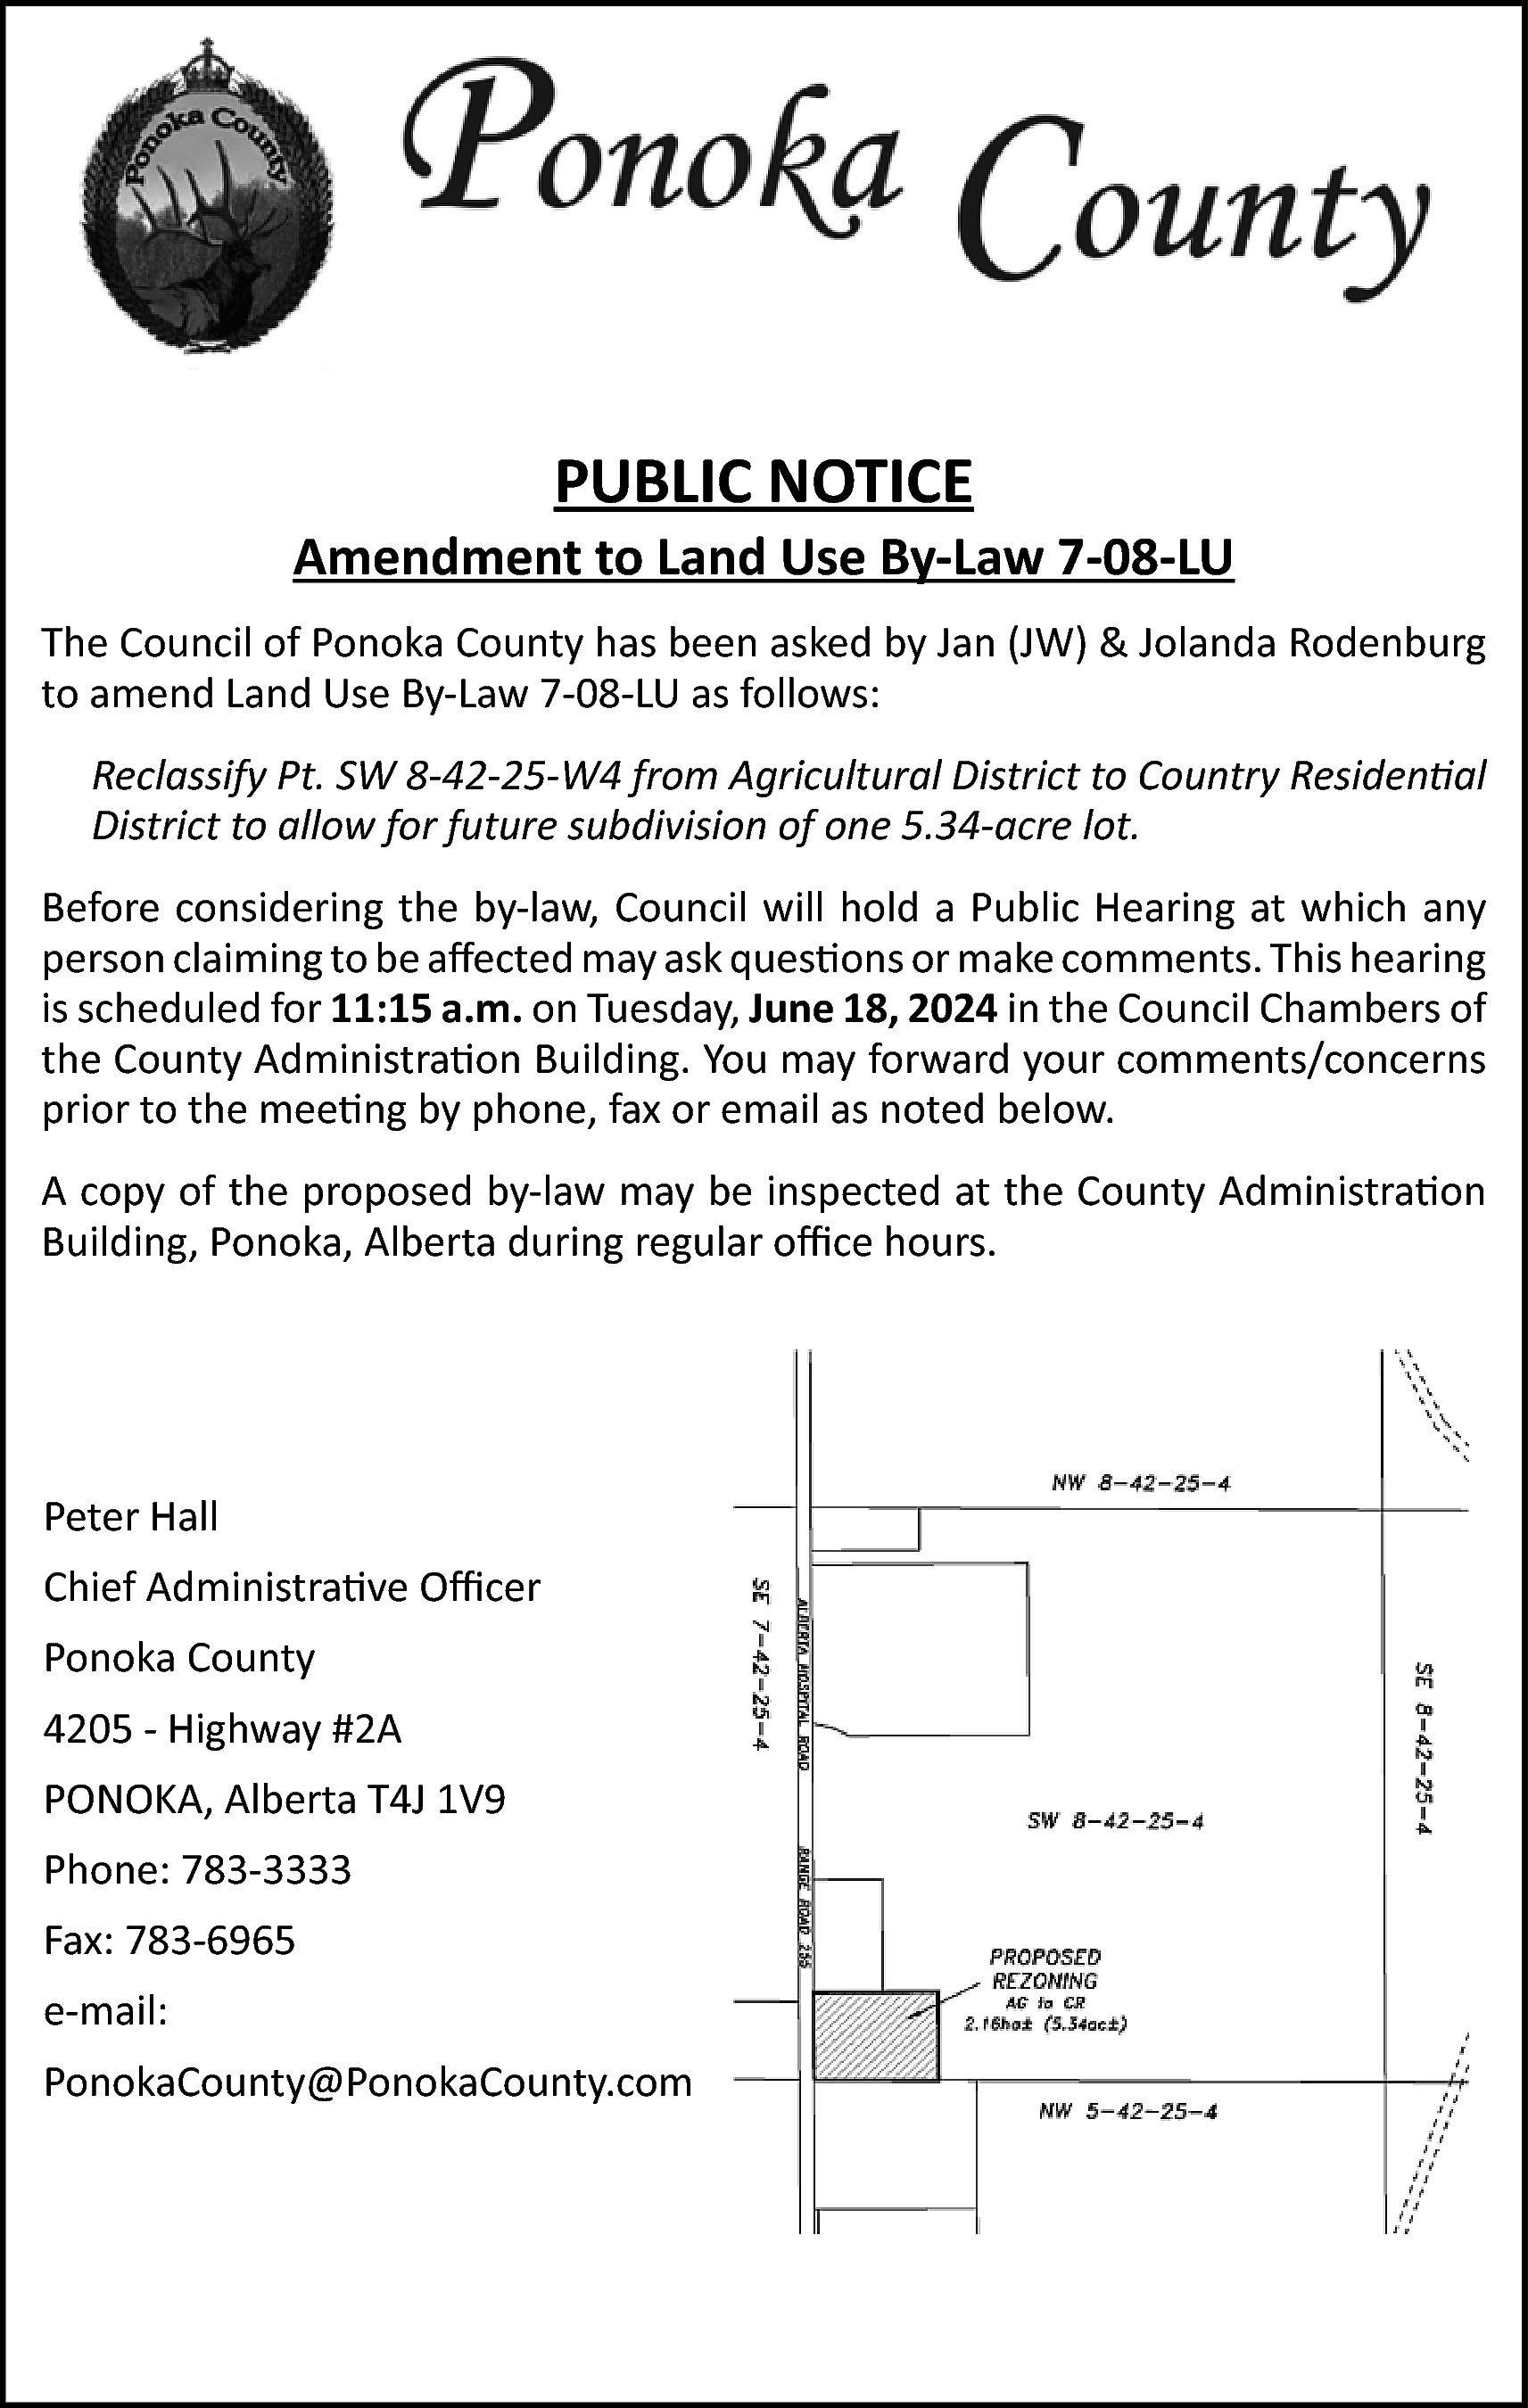 PUBLIC NOTICE <br> <br>Amendment to  PUBLIC NOTICE    Amendment to Land Use By-Law 7-08-LU  The Council of Ponoka County has been asked by Jan (JW) & Jolanda Rodenburg  to amend Land Use By-Law 7-08-LU as follows:  Reclassify Pt. SW 8-42-25-W4 from Agricultural District to Country Residential  District to allow for future subdivision of one 5.34-acre lot.  Before considering the by-law, Council will hold a Public Hearing at which any  person claiming to be affected may ask questions or make comments. This hearing  is scheduled for 11:15 a.m. on Tuesday, June 18, 2024 in the Council Chambers of  the County Administration Building. You may forward your comments/concerns  prior to the meeting by phone, fax or email as noted below.  A copy of the proposed by-law may be inspected at the County Administration  Building, Ponoka, Alberta during regular office hours.    Peter Hall  Chief Administrative Officer  Ponoka County  4205 - Highway #2A  PONOKA, Alberta T4J 1V9  Phone: 783-3333  Fax: 783-6965  e-mail:  PonokaCounty@PonokaCounty.com    